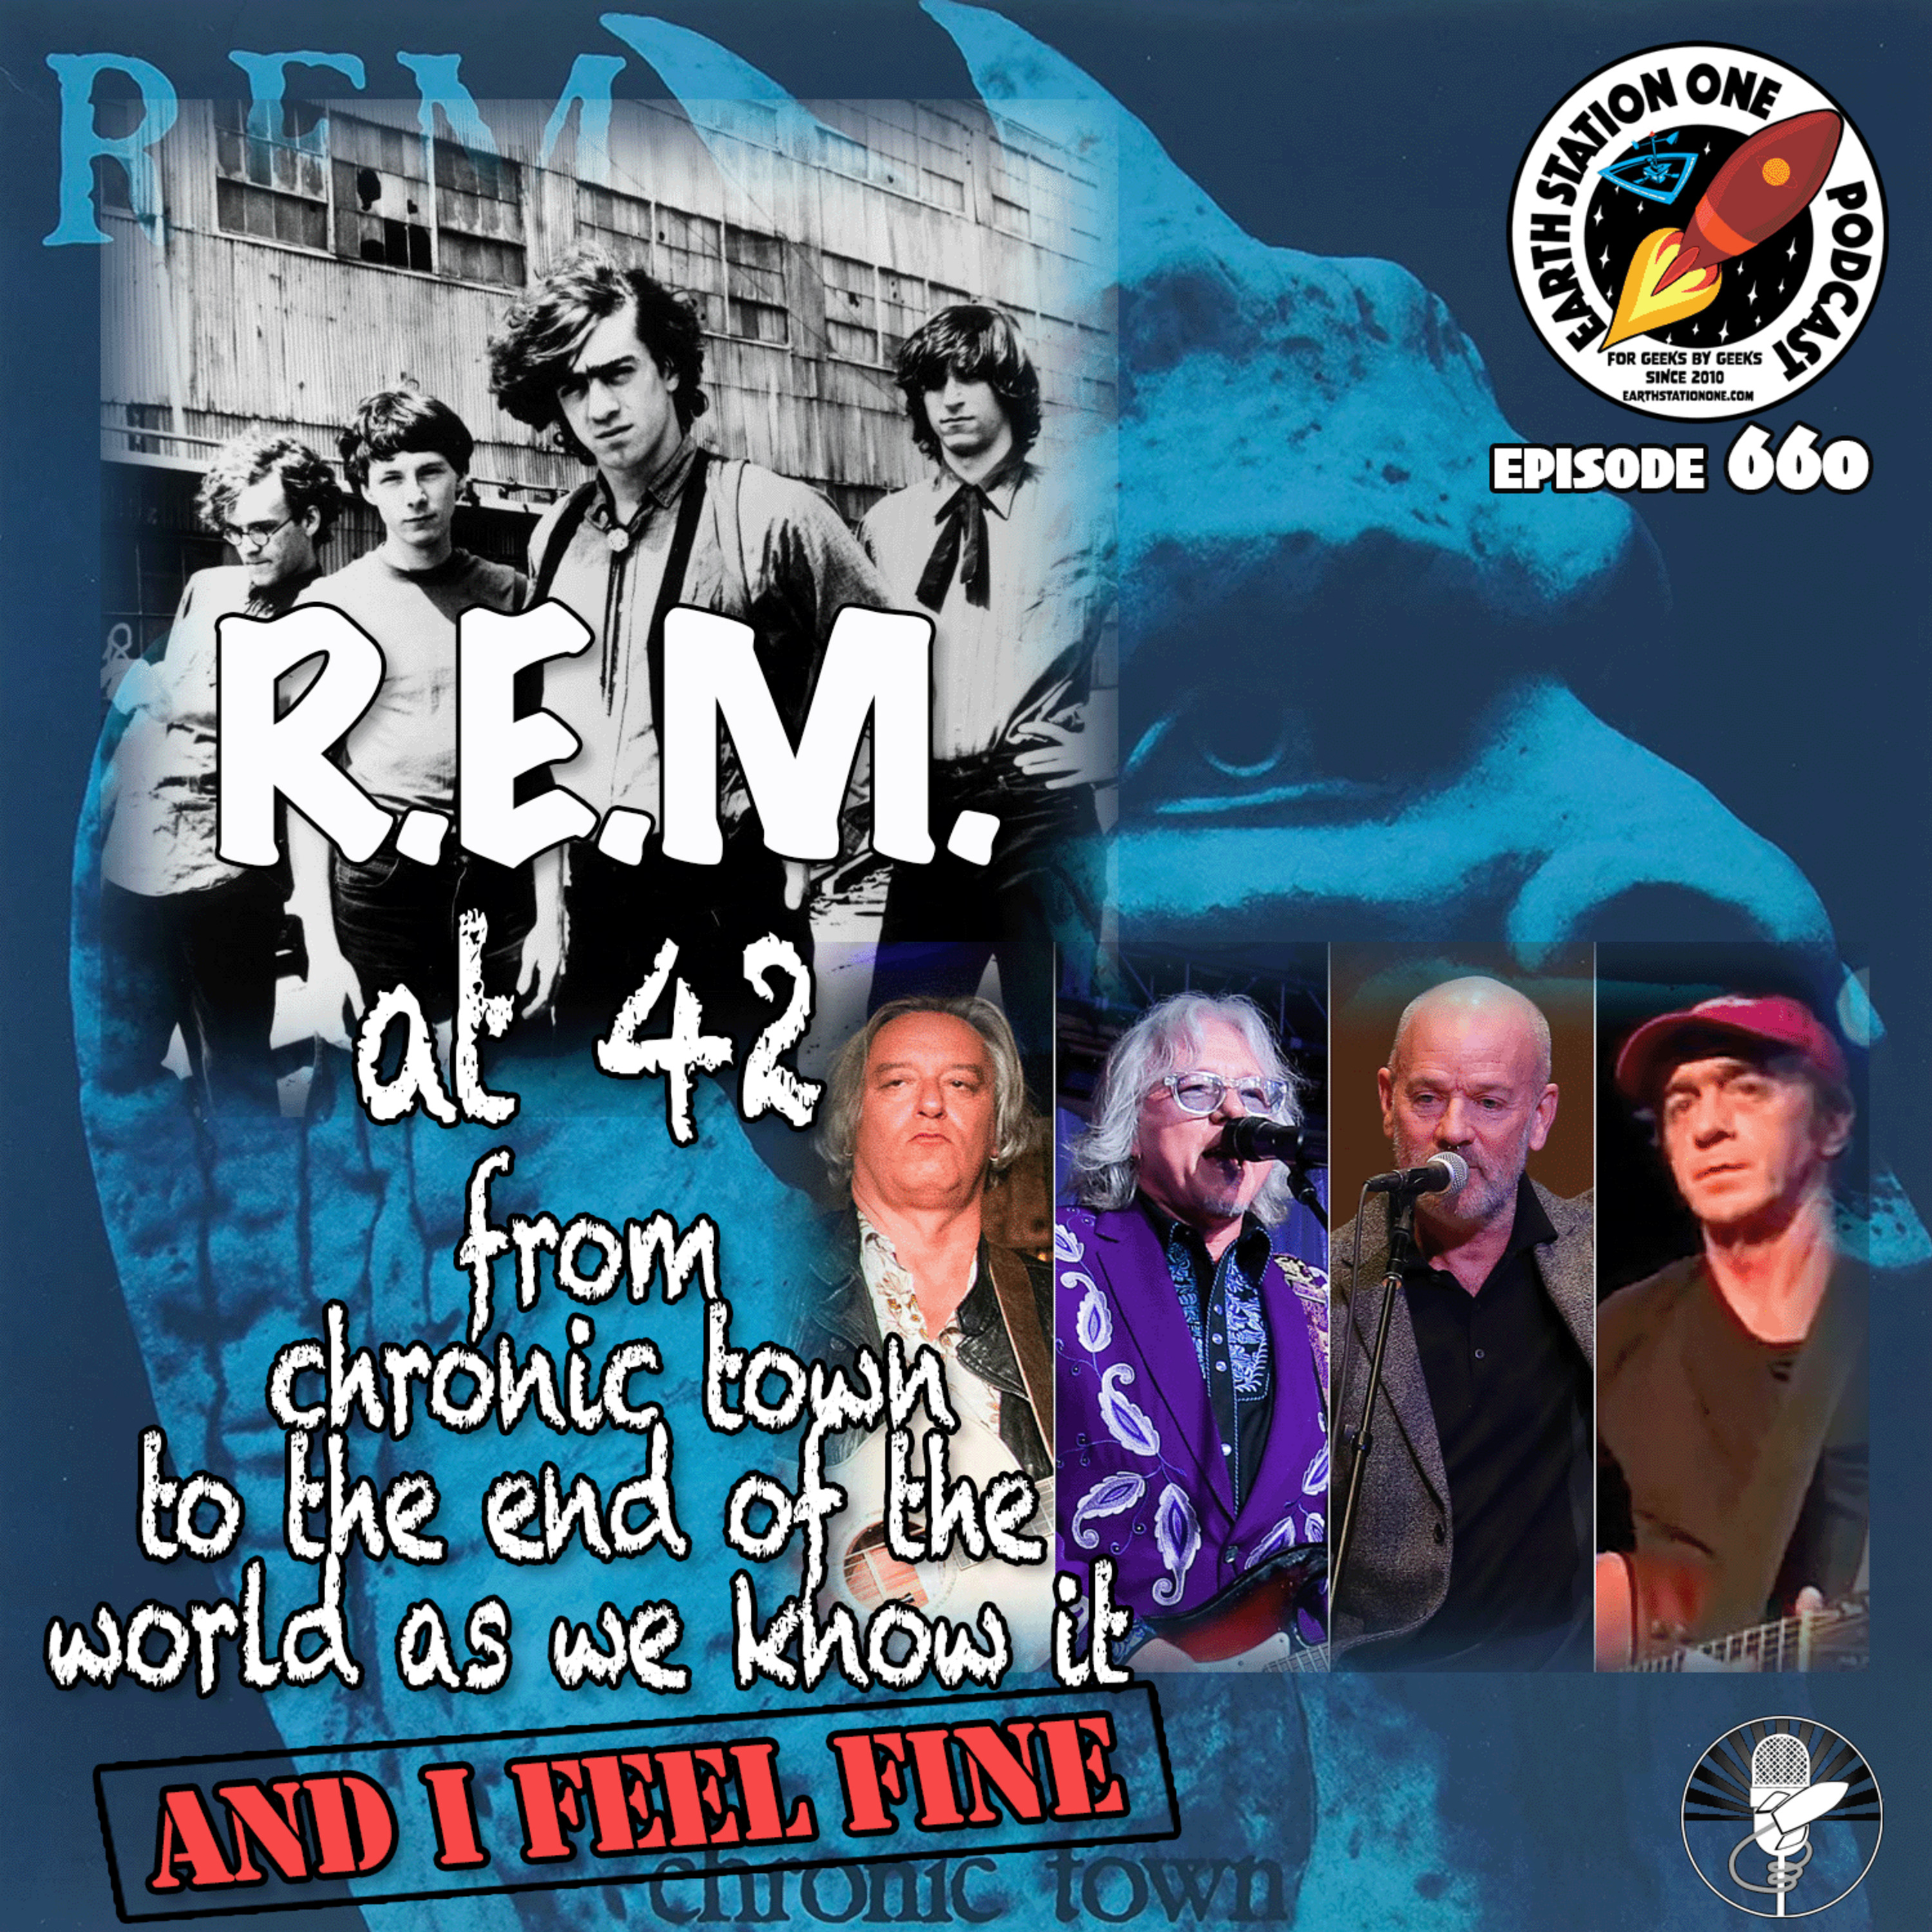 The Earth Station One Podcast - R.E.M. At 42: And I Feel Fine